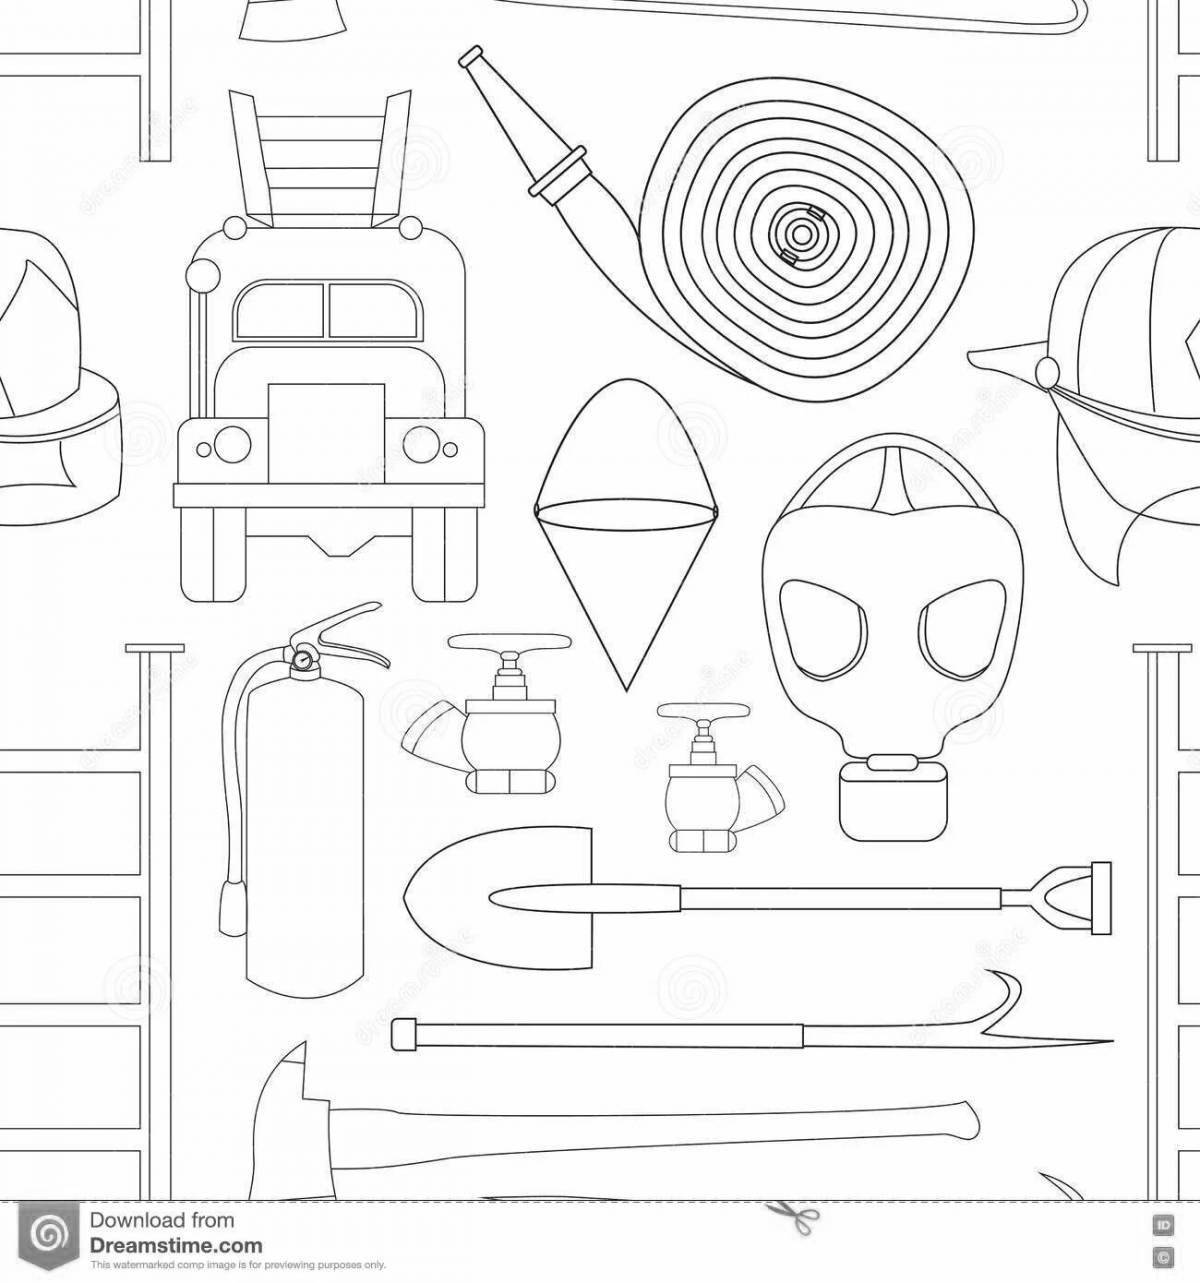 Attractive fire shield coloring page